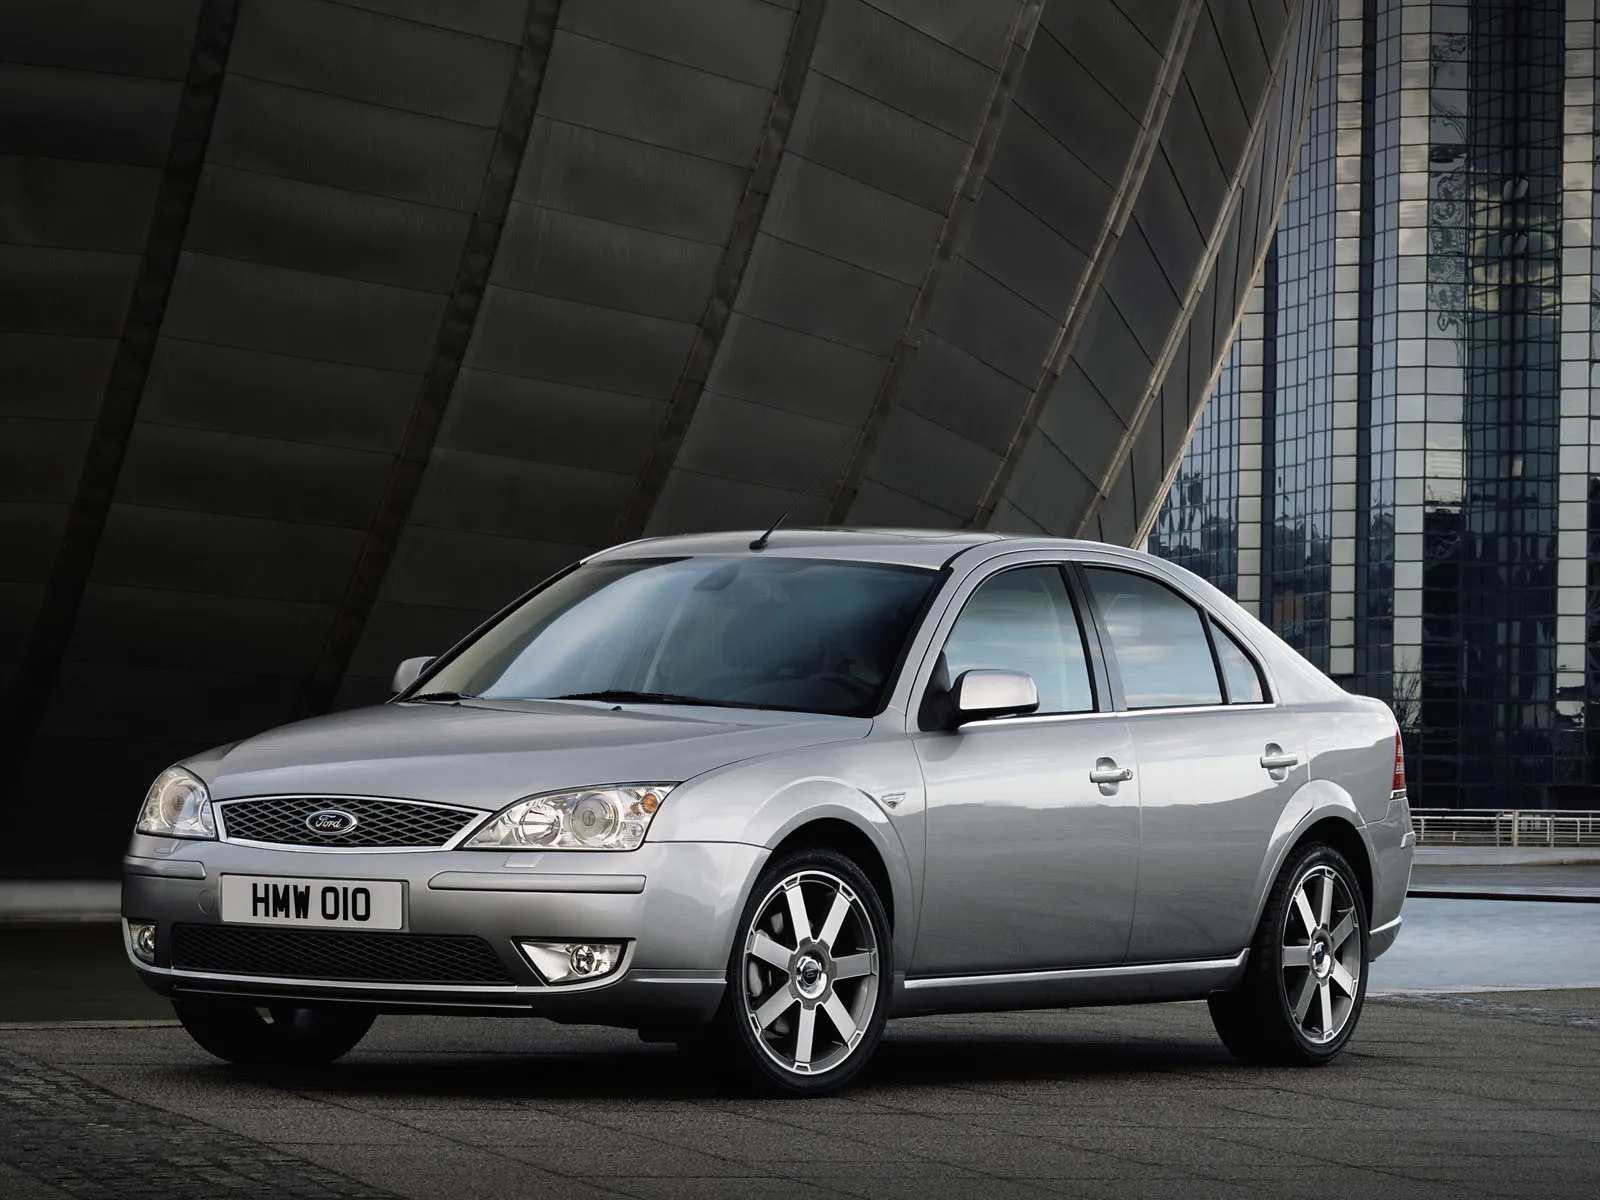 Ford Mondeo 1.8 2005 photo - 9